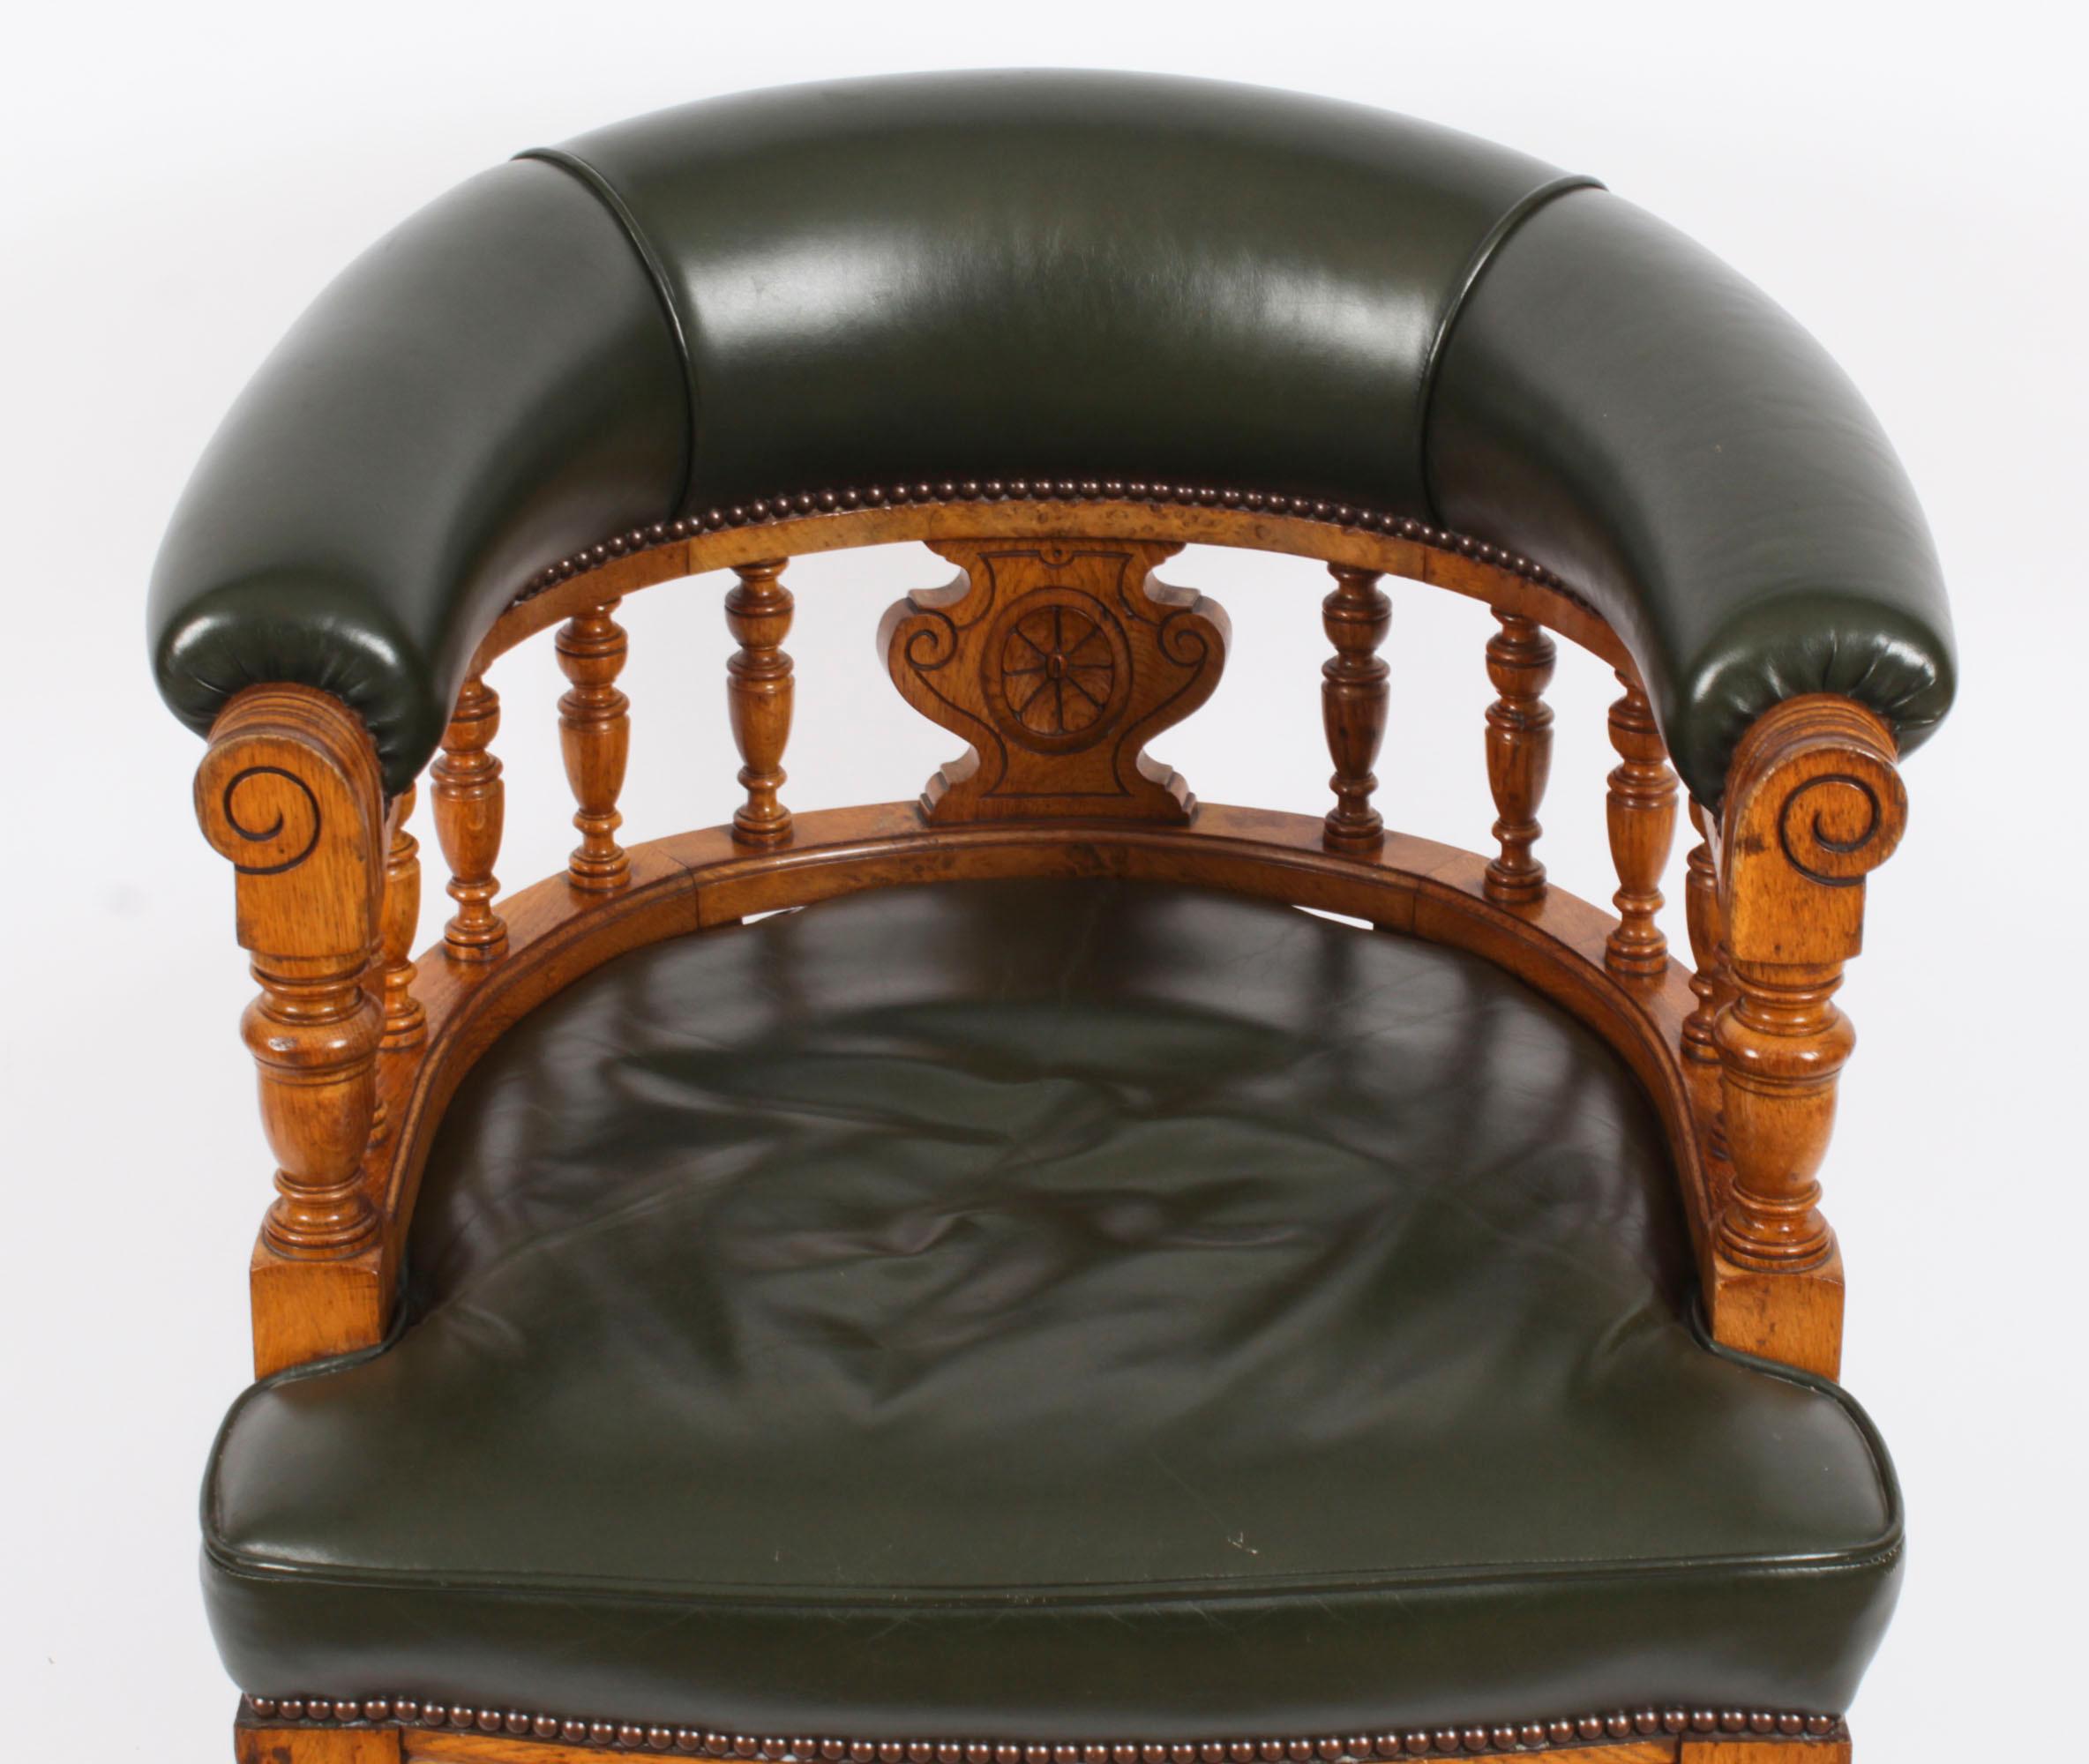 Early 20th Century Antique Edwardian Tub Desk Armchair Green Leather Upholstered Circa 1910 For Sale